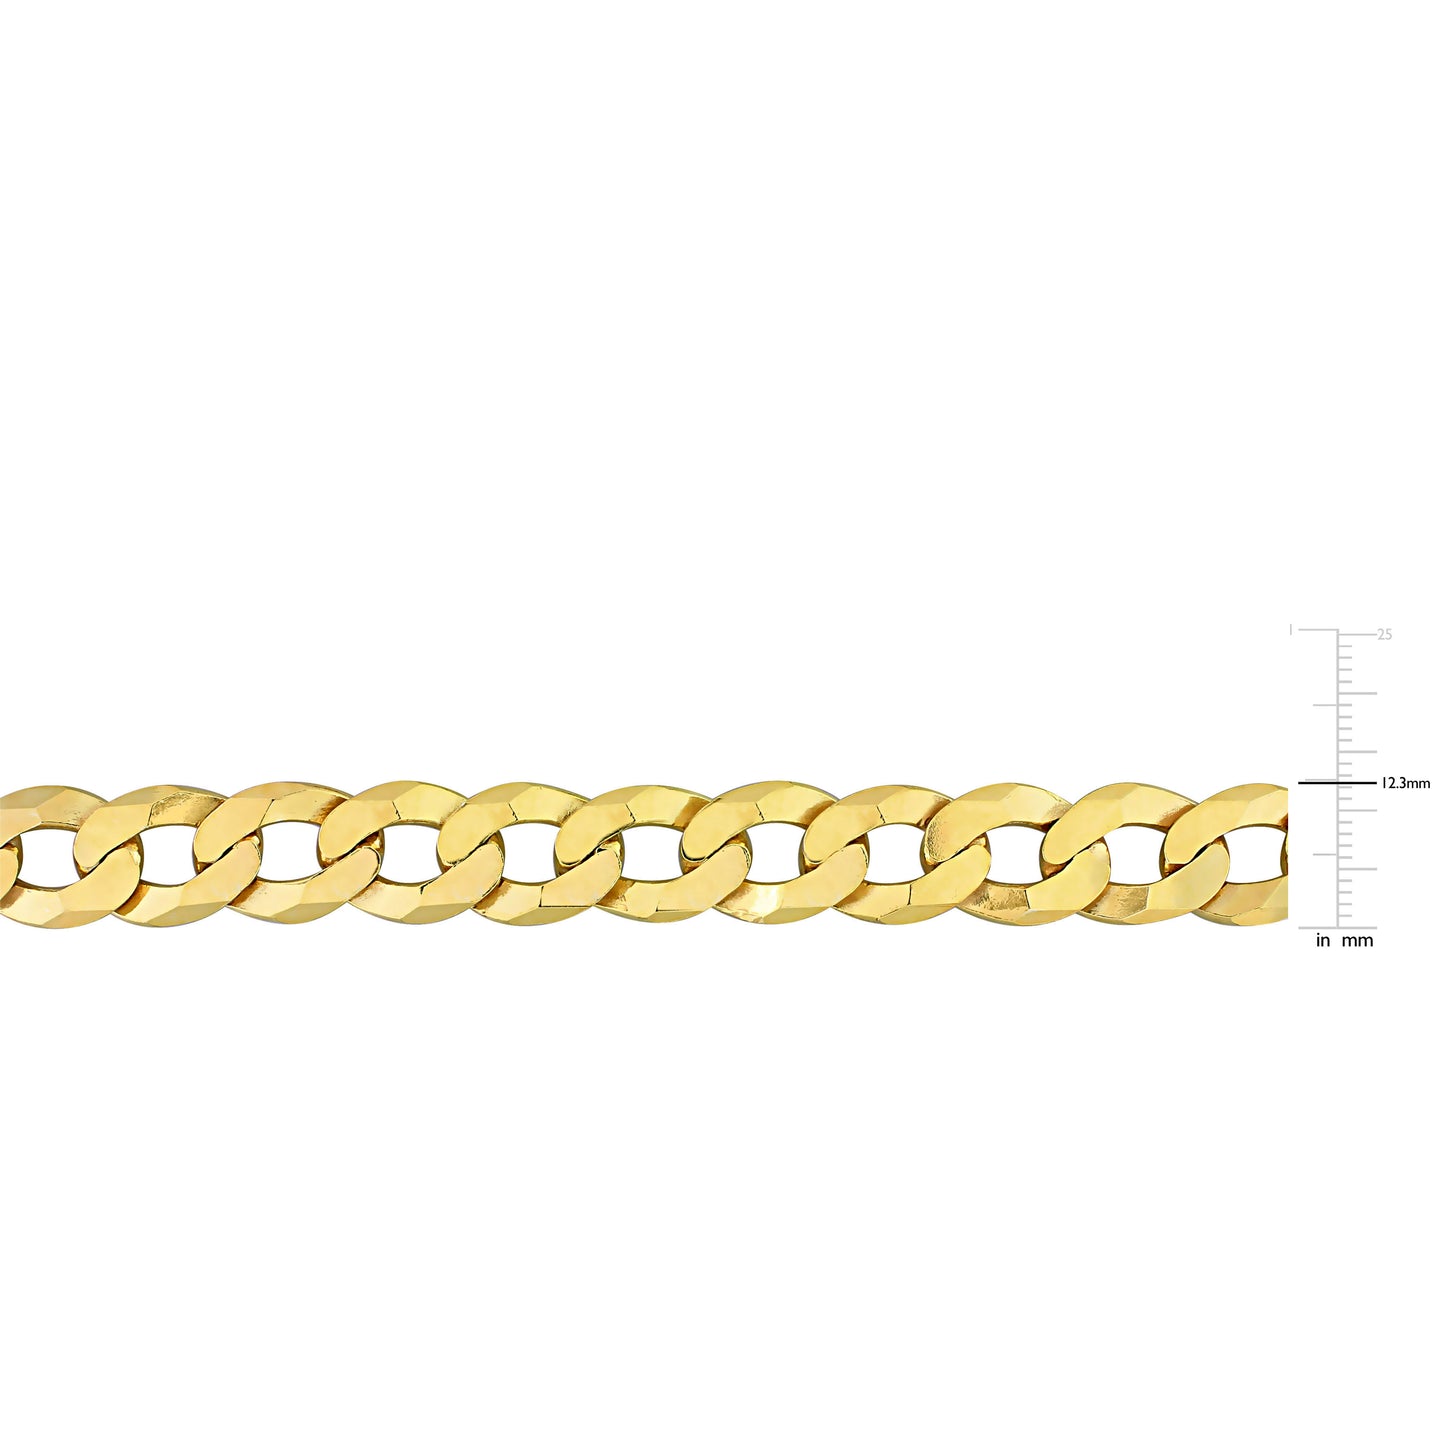 18k Yellow Gold Plated Curb Link Chain Bracelet in 12.3mm